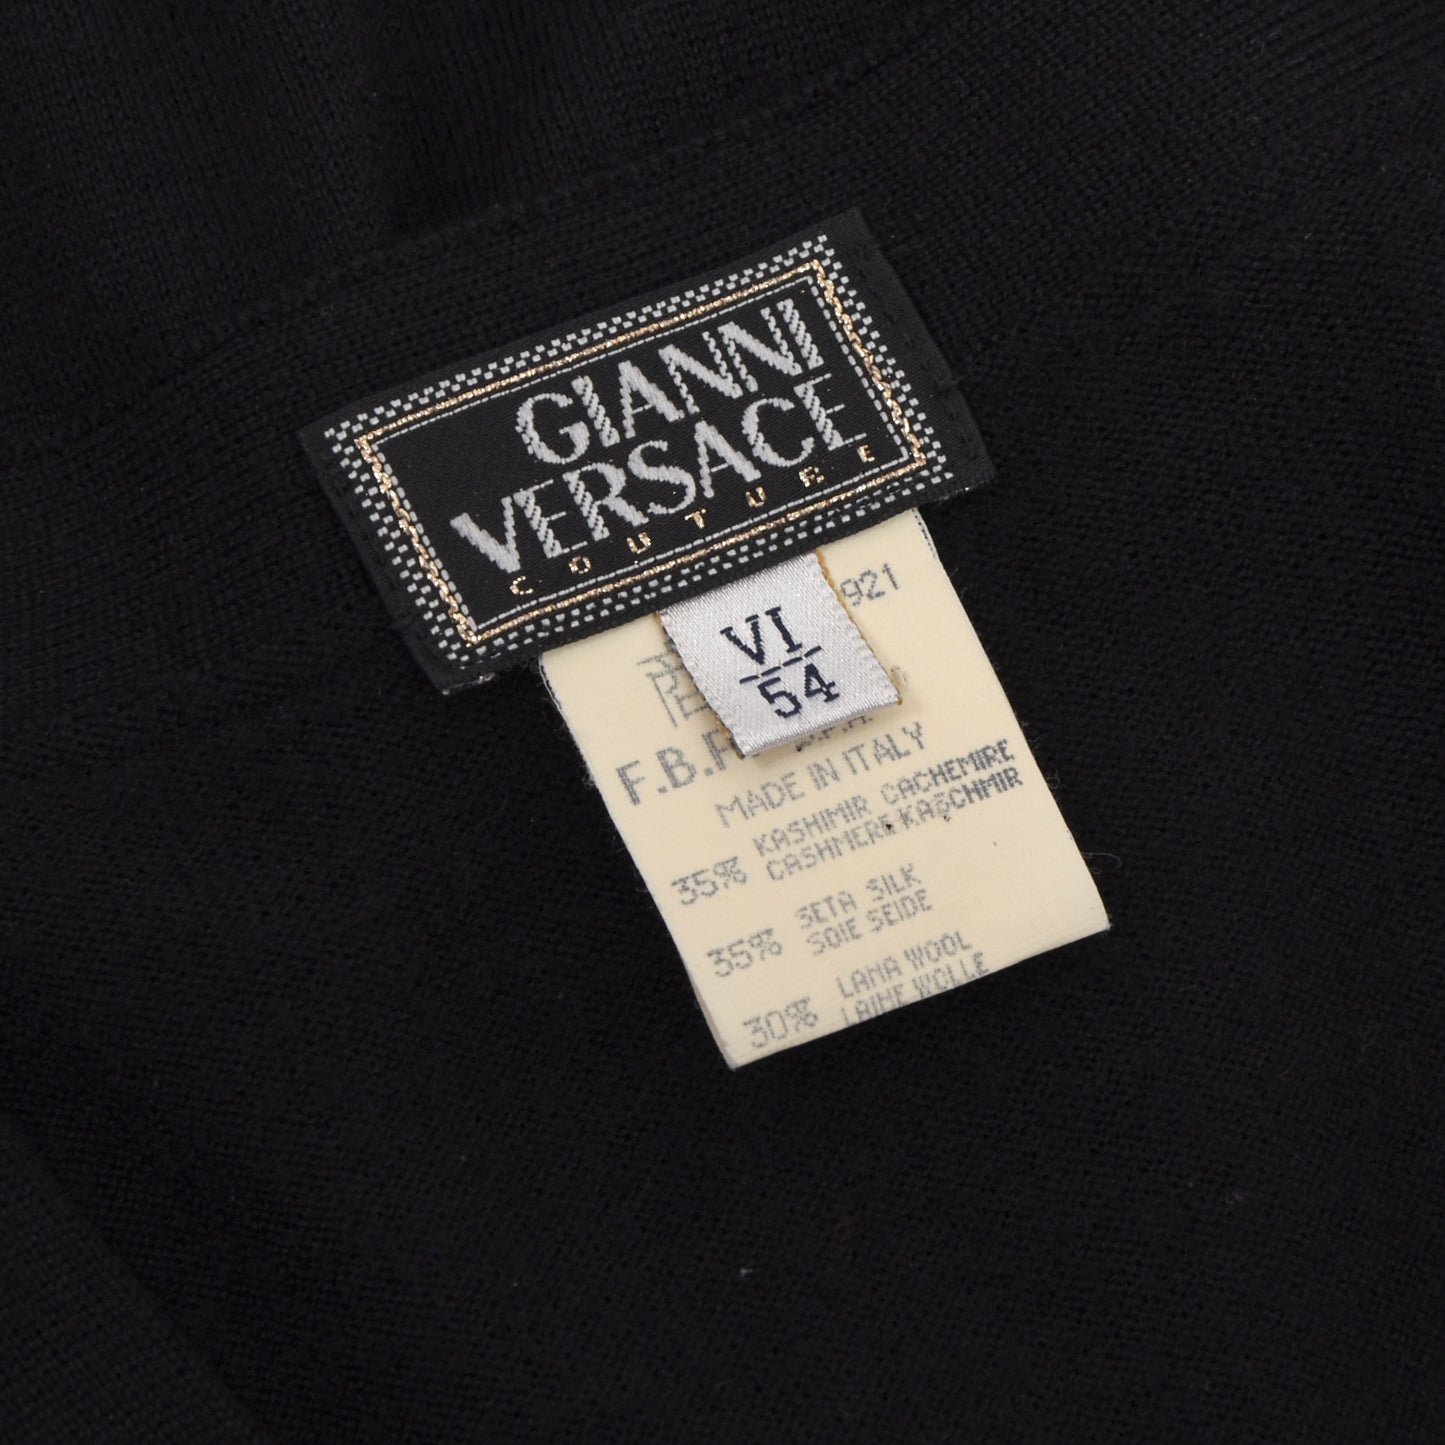 Gianni Versace Couture Cashmere/Silk/Wool Sweater Vest Size 54 - Black